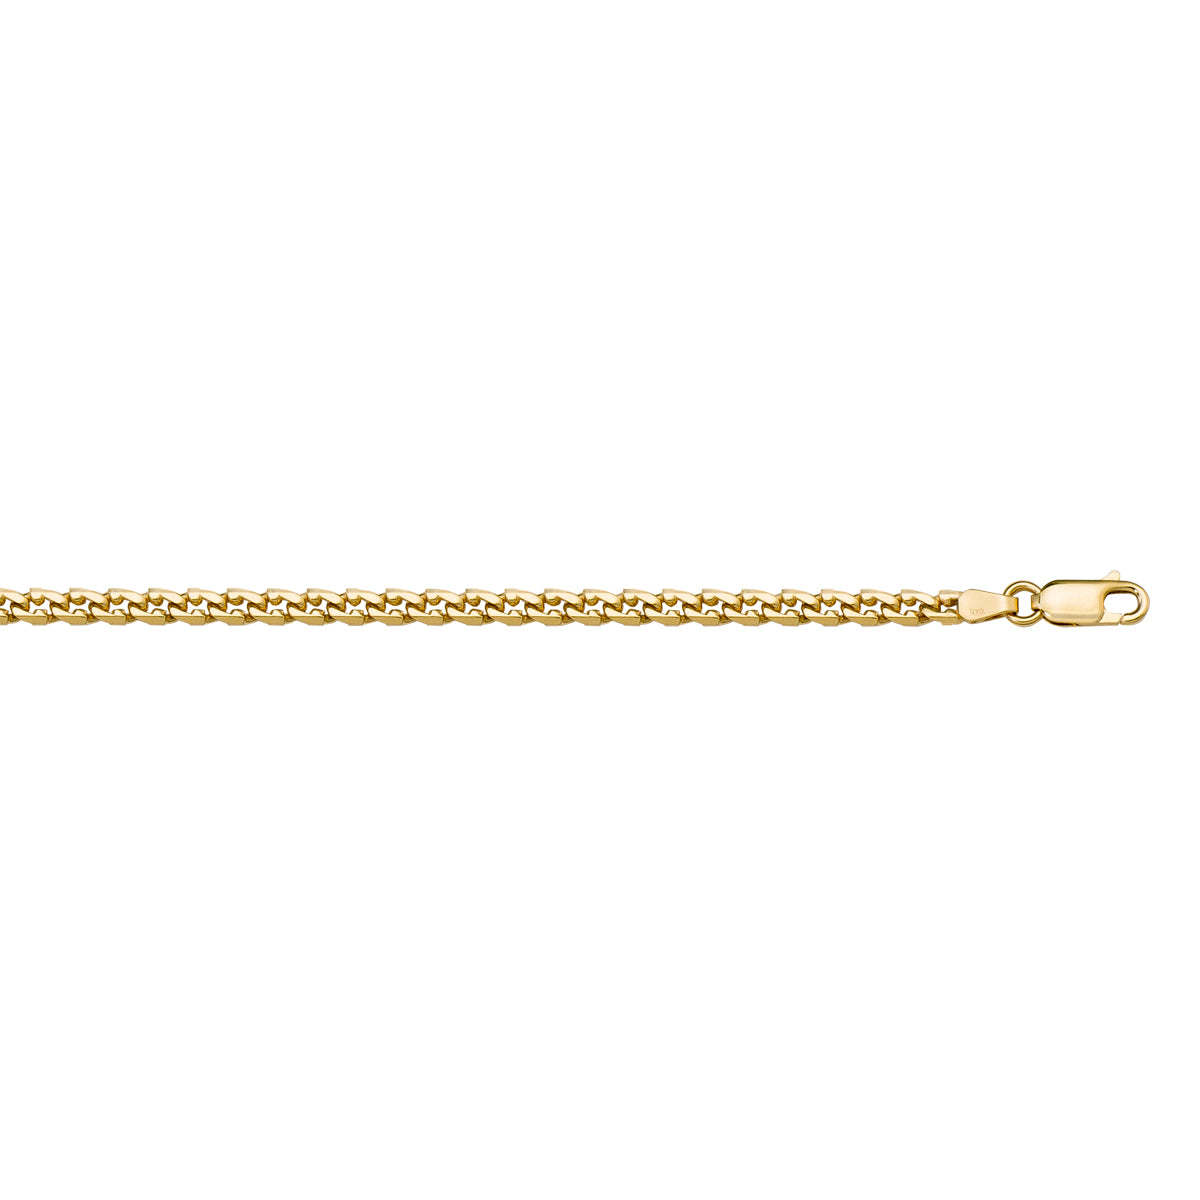 BRACELETS YELLOW GOLD SOLID L.F. LINK CHAIN